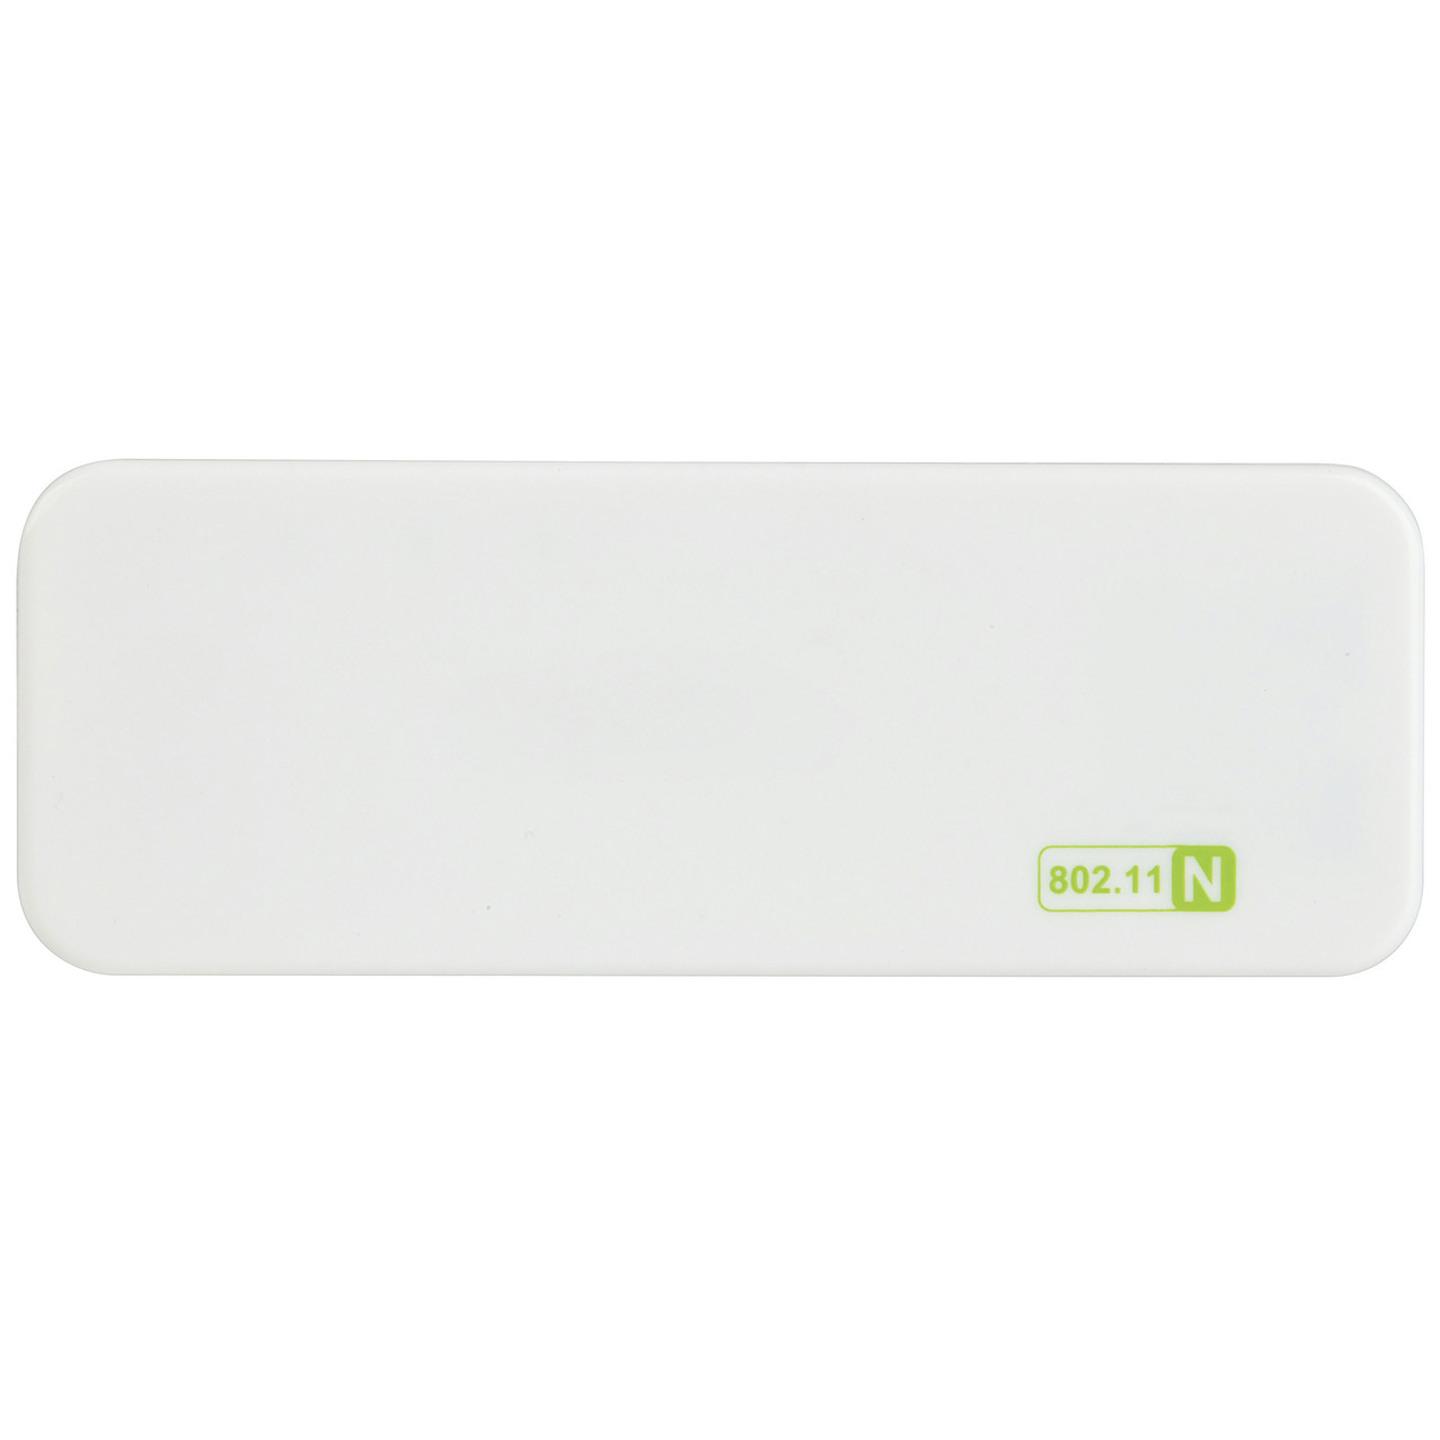 802.11n 150Mbps Travellers Wireless Access Point